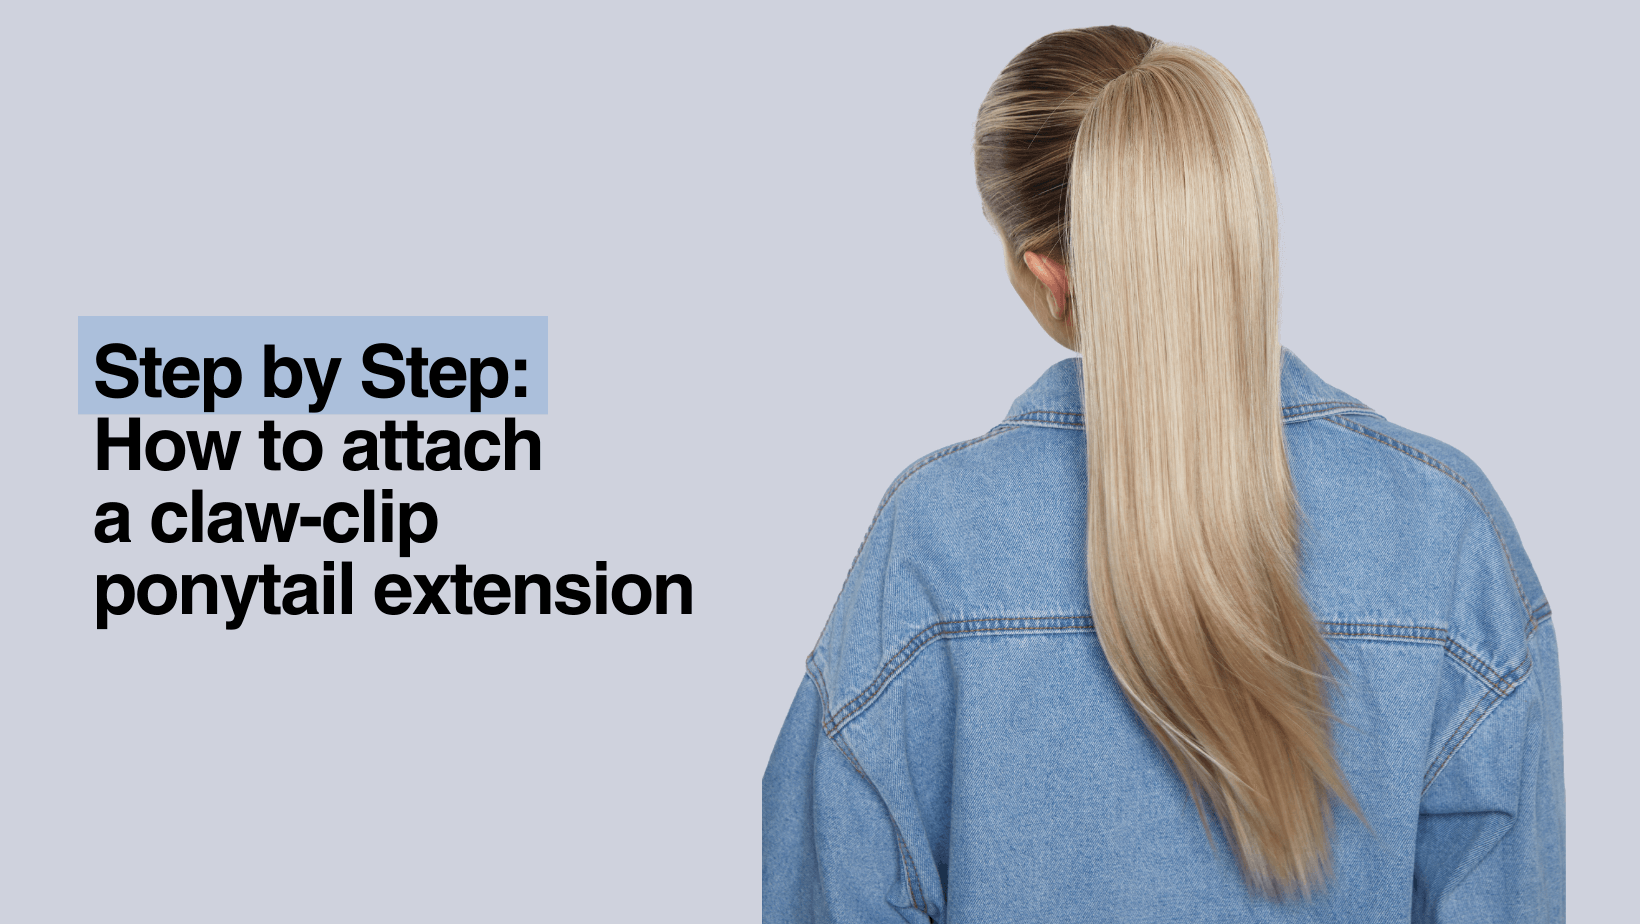 How to Install a Claw-Clip Ponytail Extension